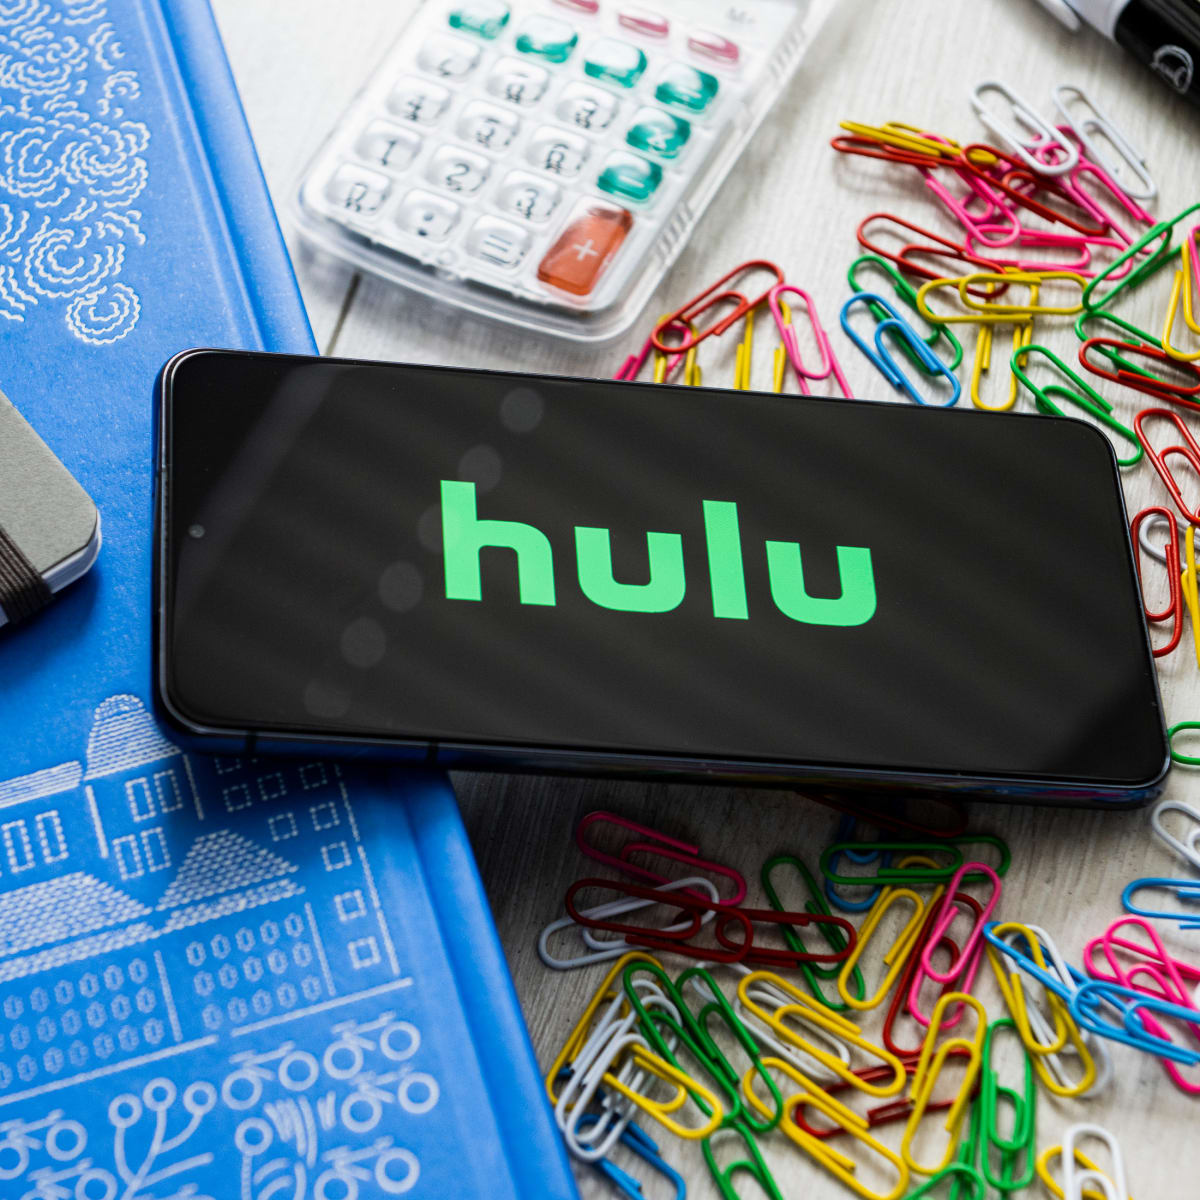 Hulu Streaming Deal Discounts Subscription Price to $2: Get 75% Off